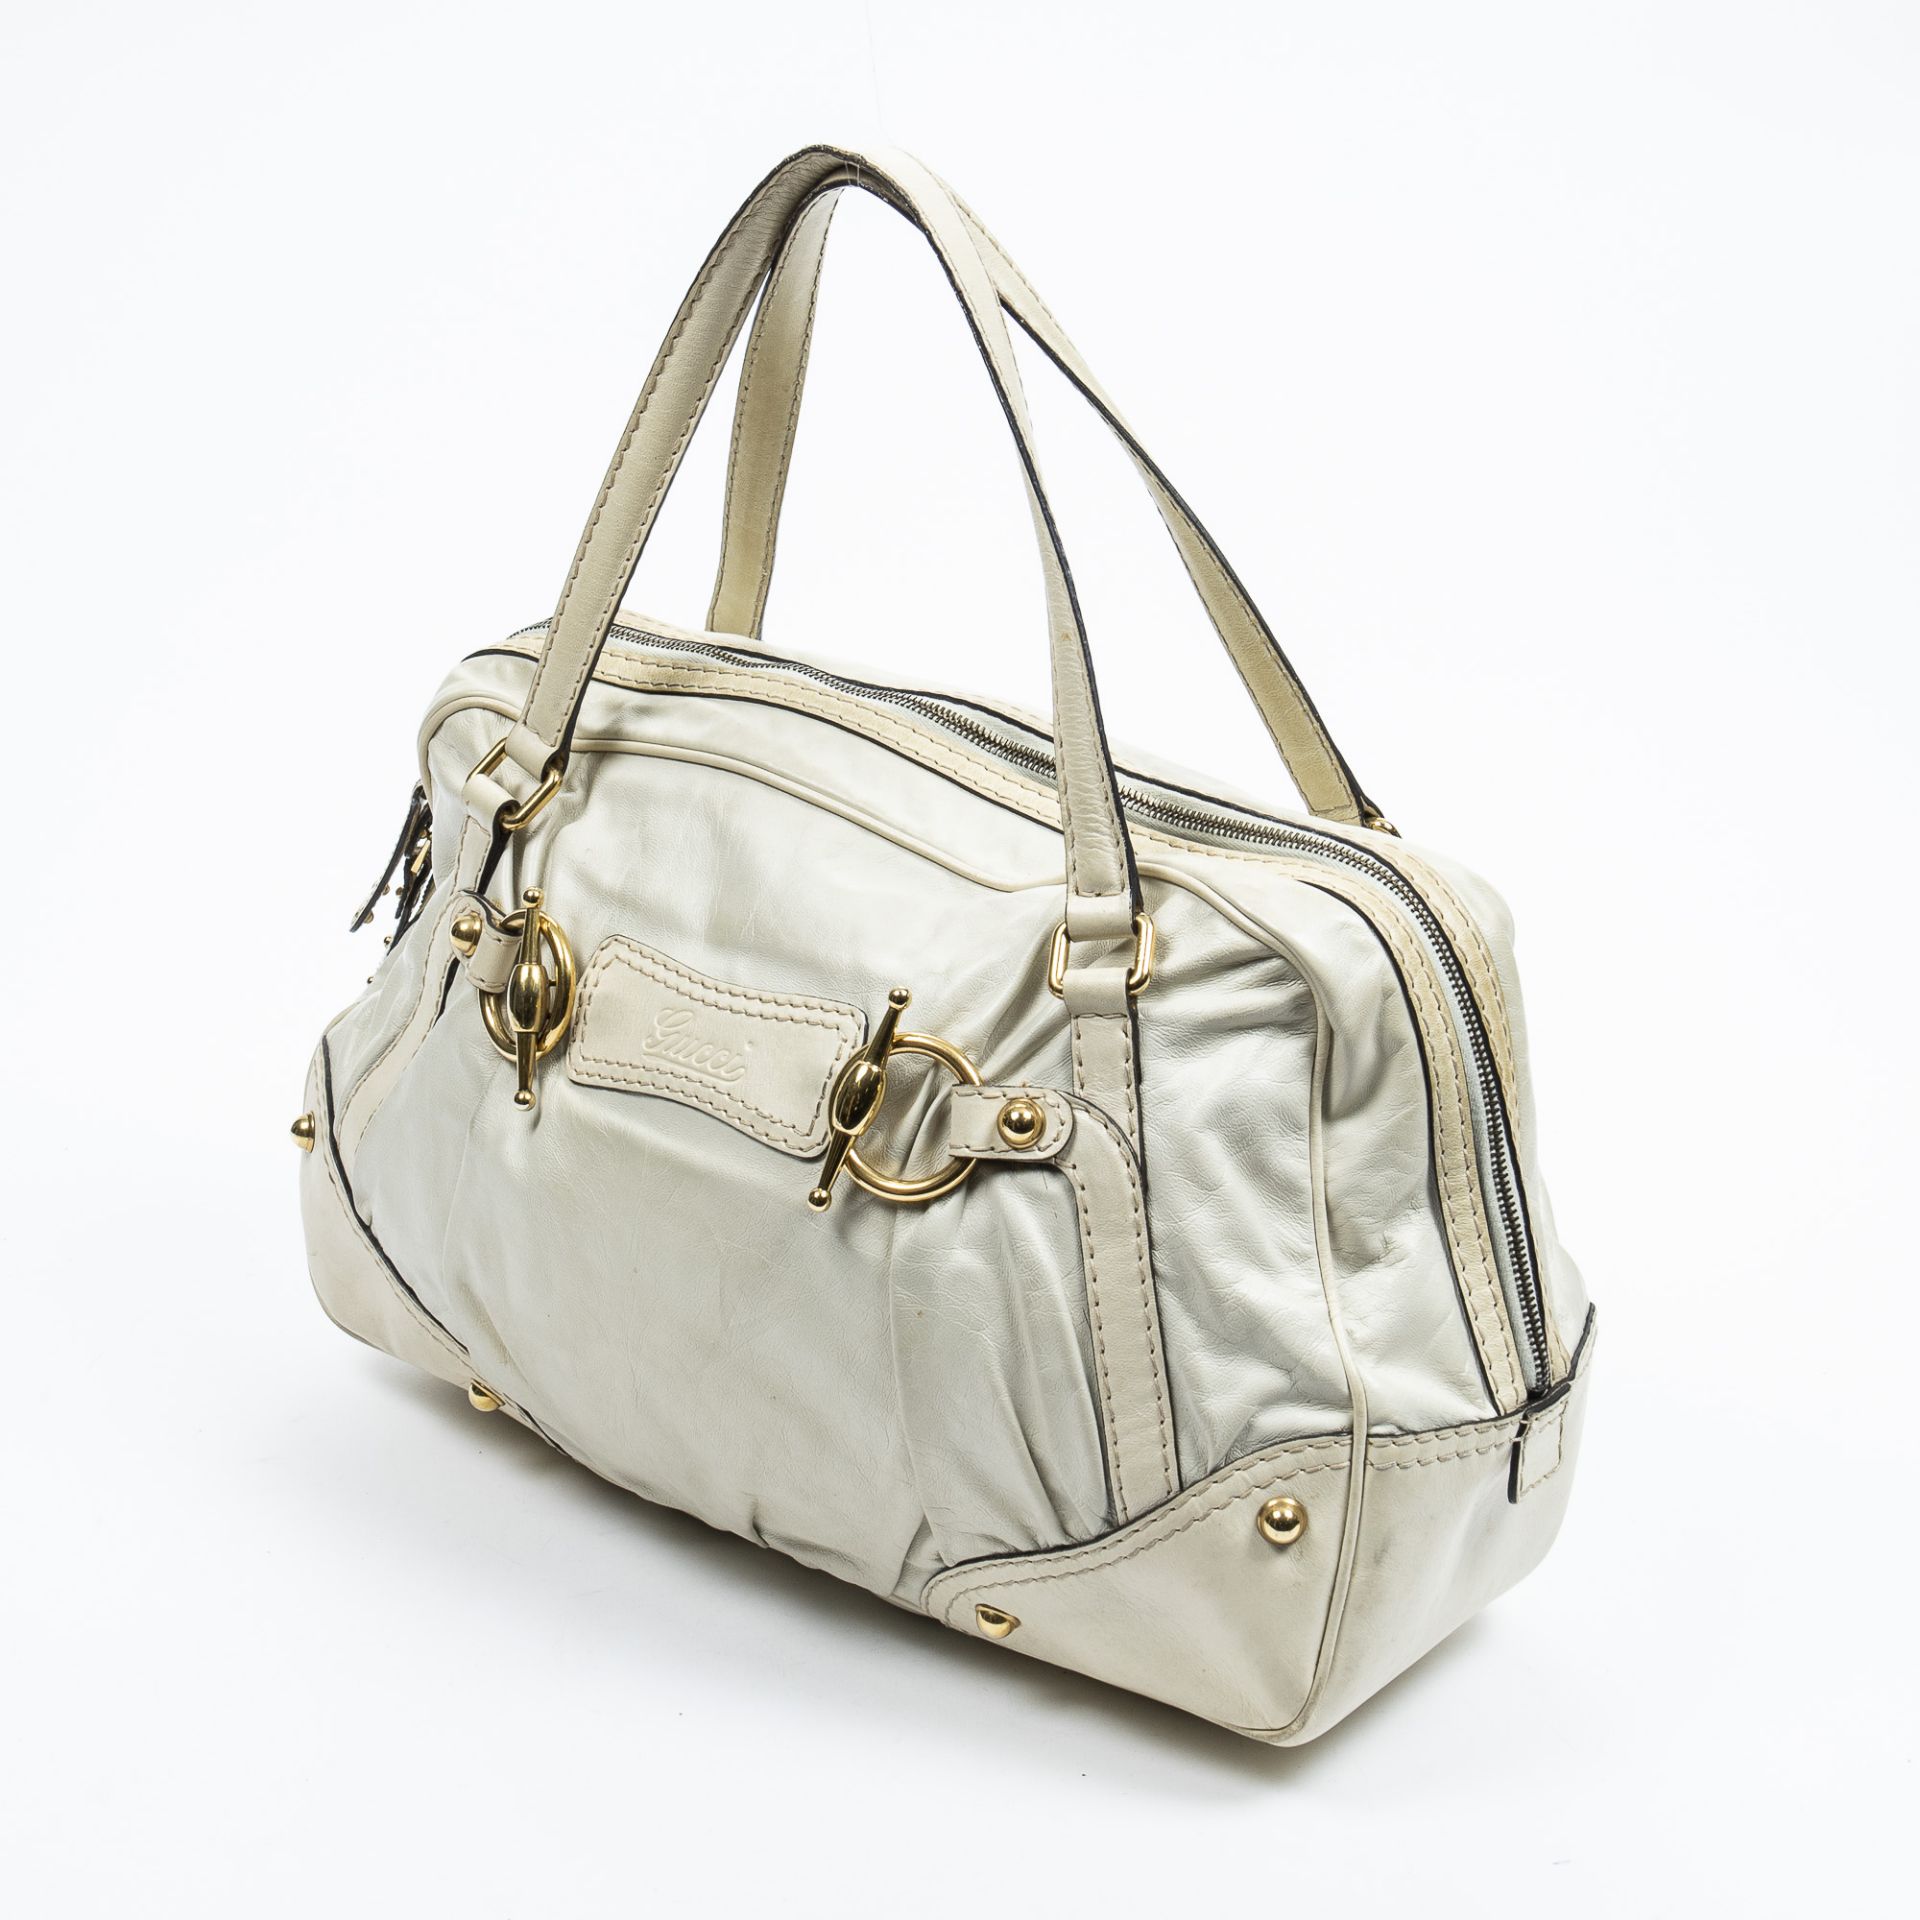 RRP £925.00 Lot To Contain 1 Gucci Calf Leather Jockey Boston Bag Shoulder Bag In Ivory - 38*27*14cm - Image 2 of 4